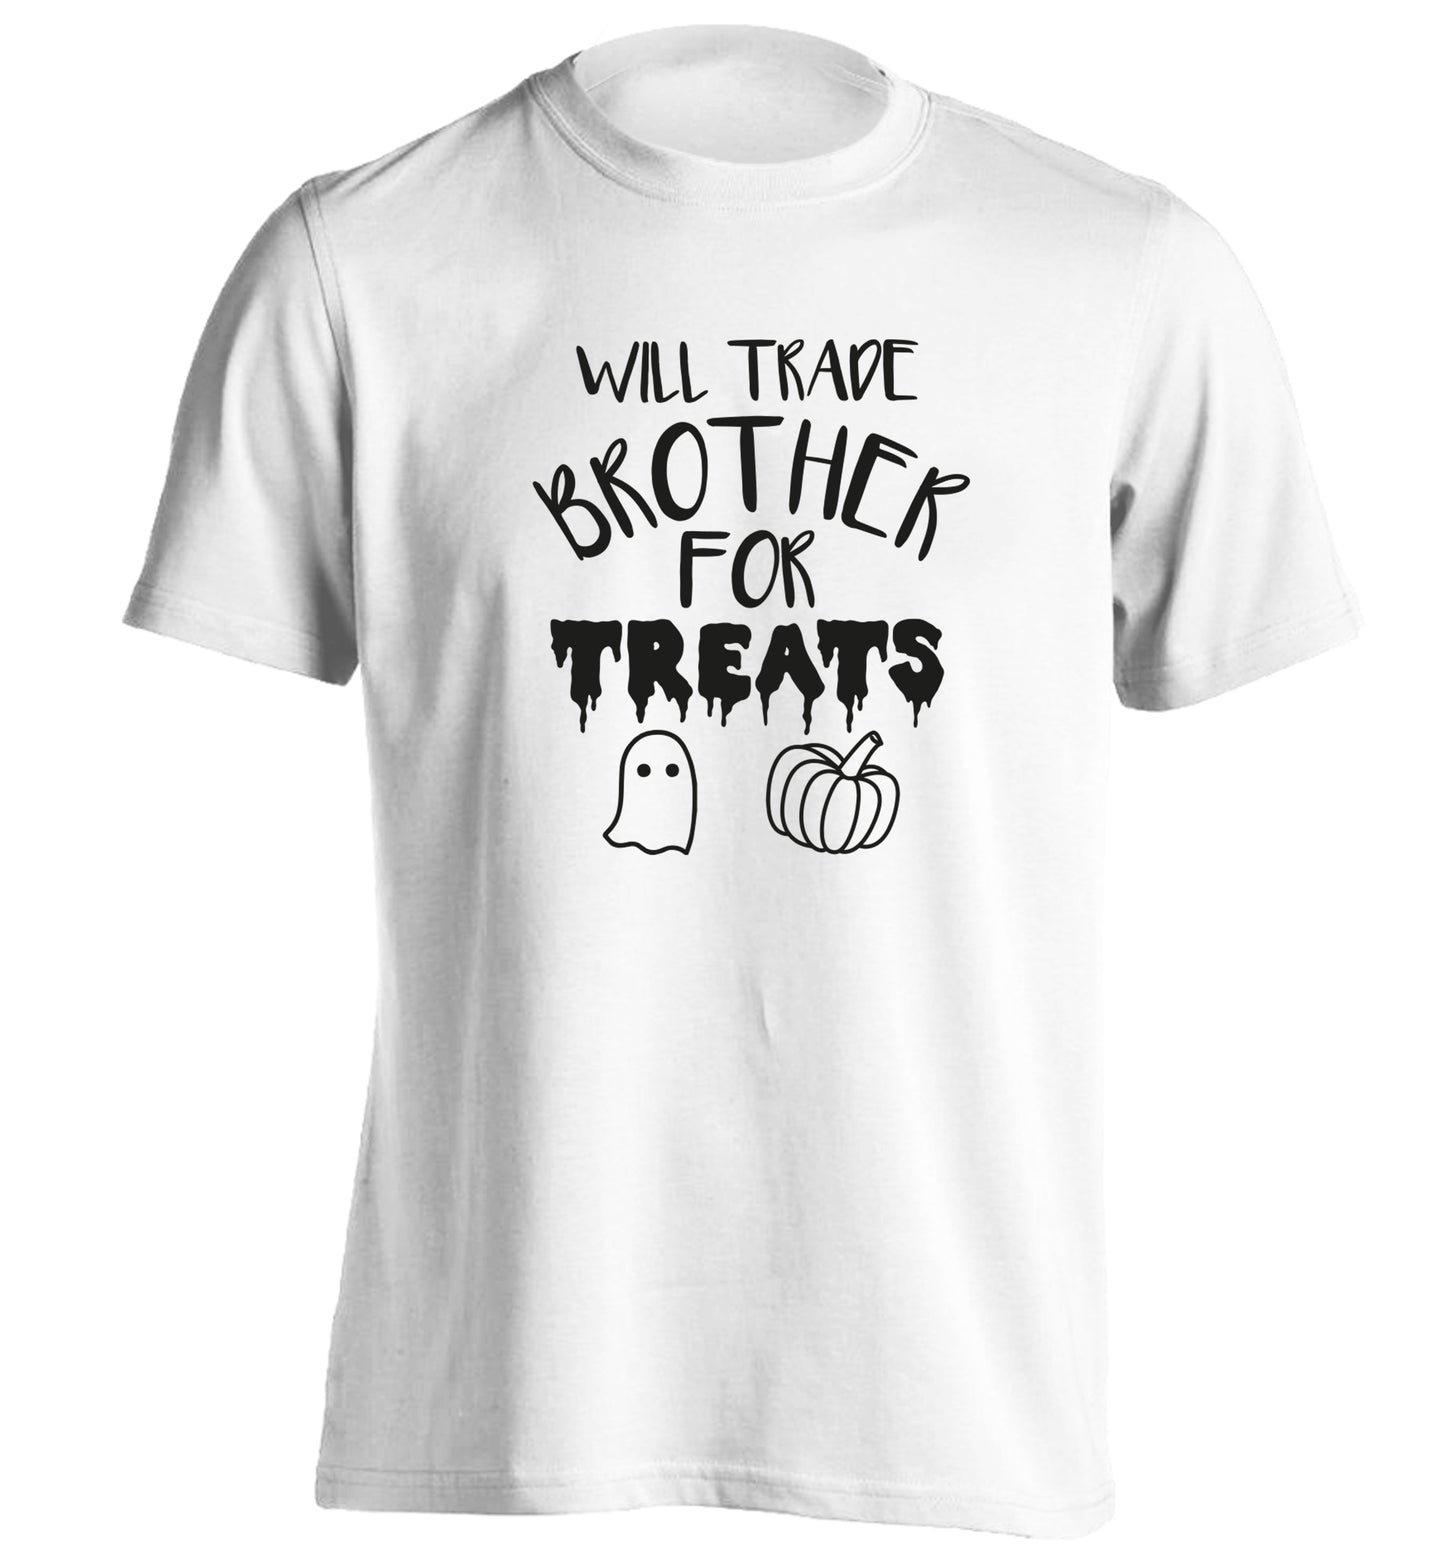 Will trade brother for sweets adults unisex white Tshirt 2XL